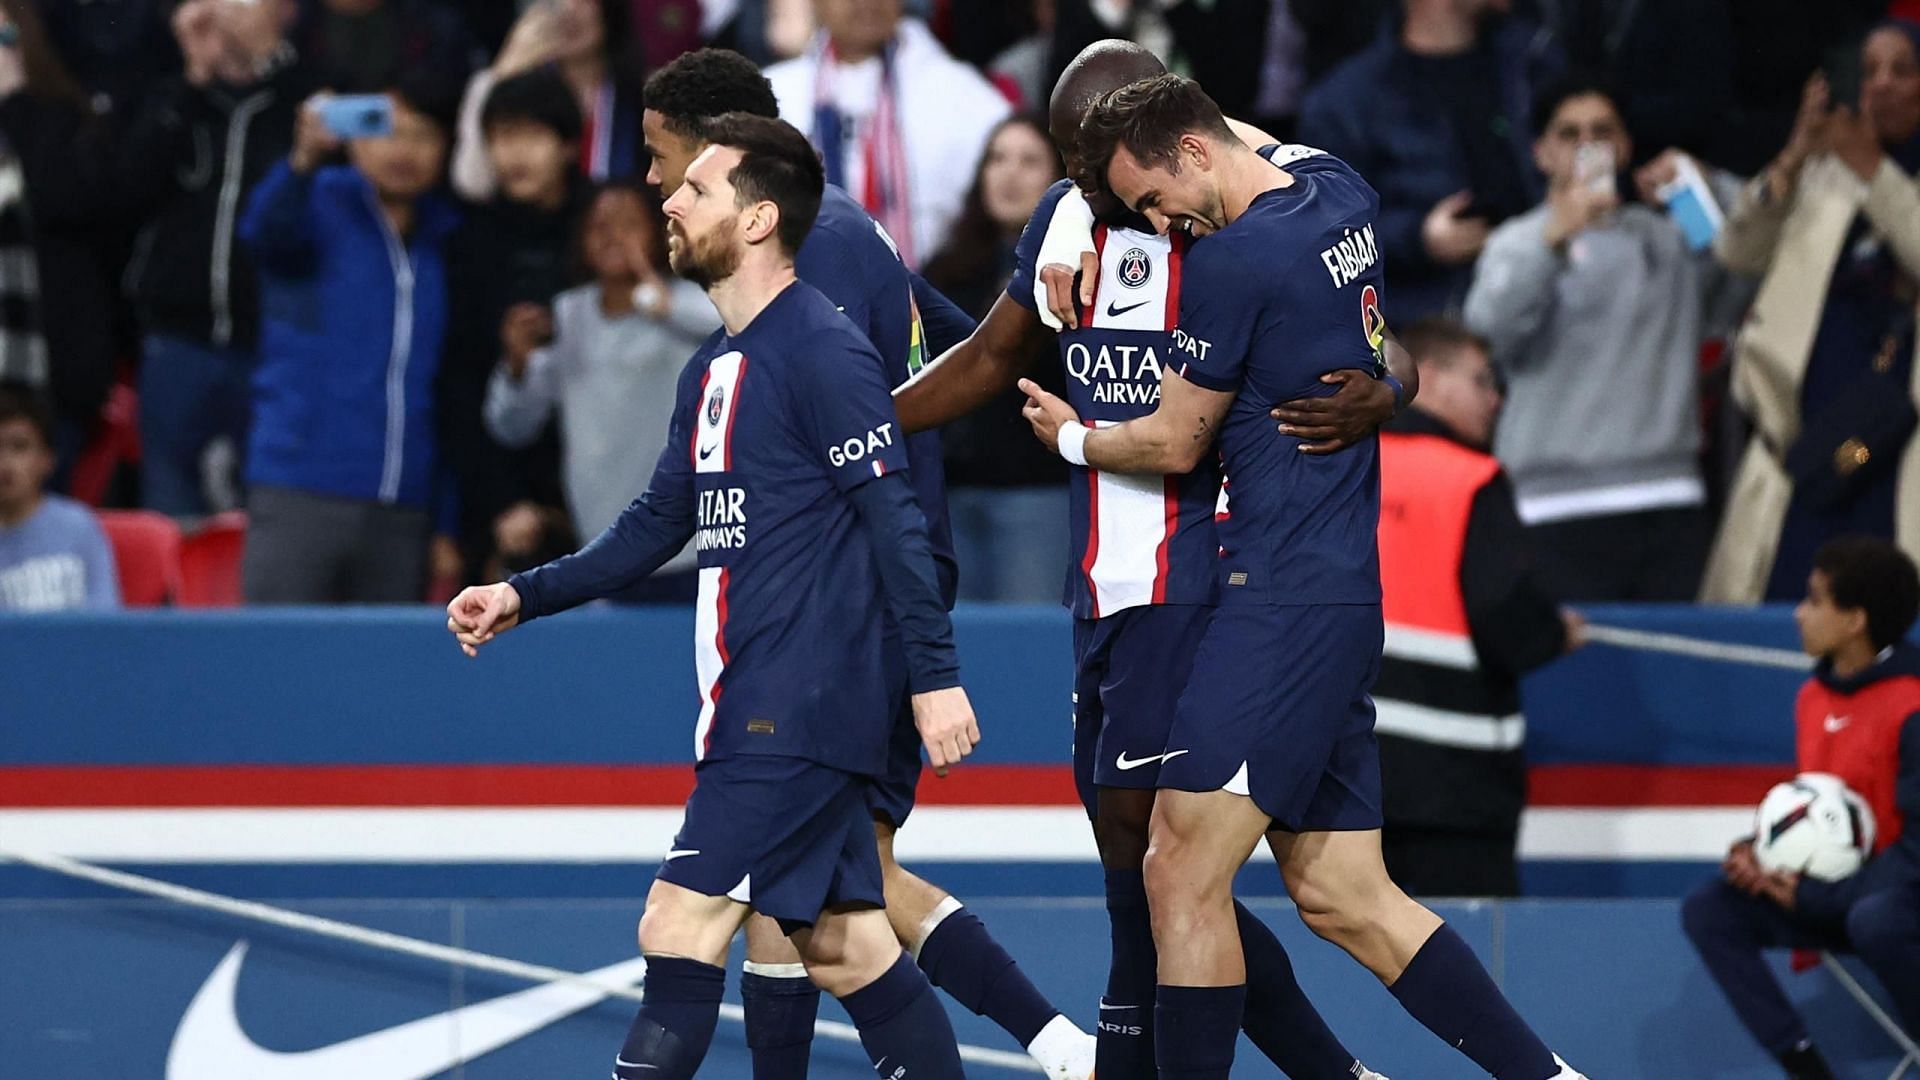 The Parisians cruised to a big win on Messi